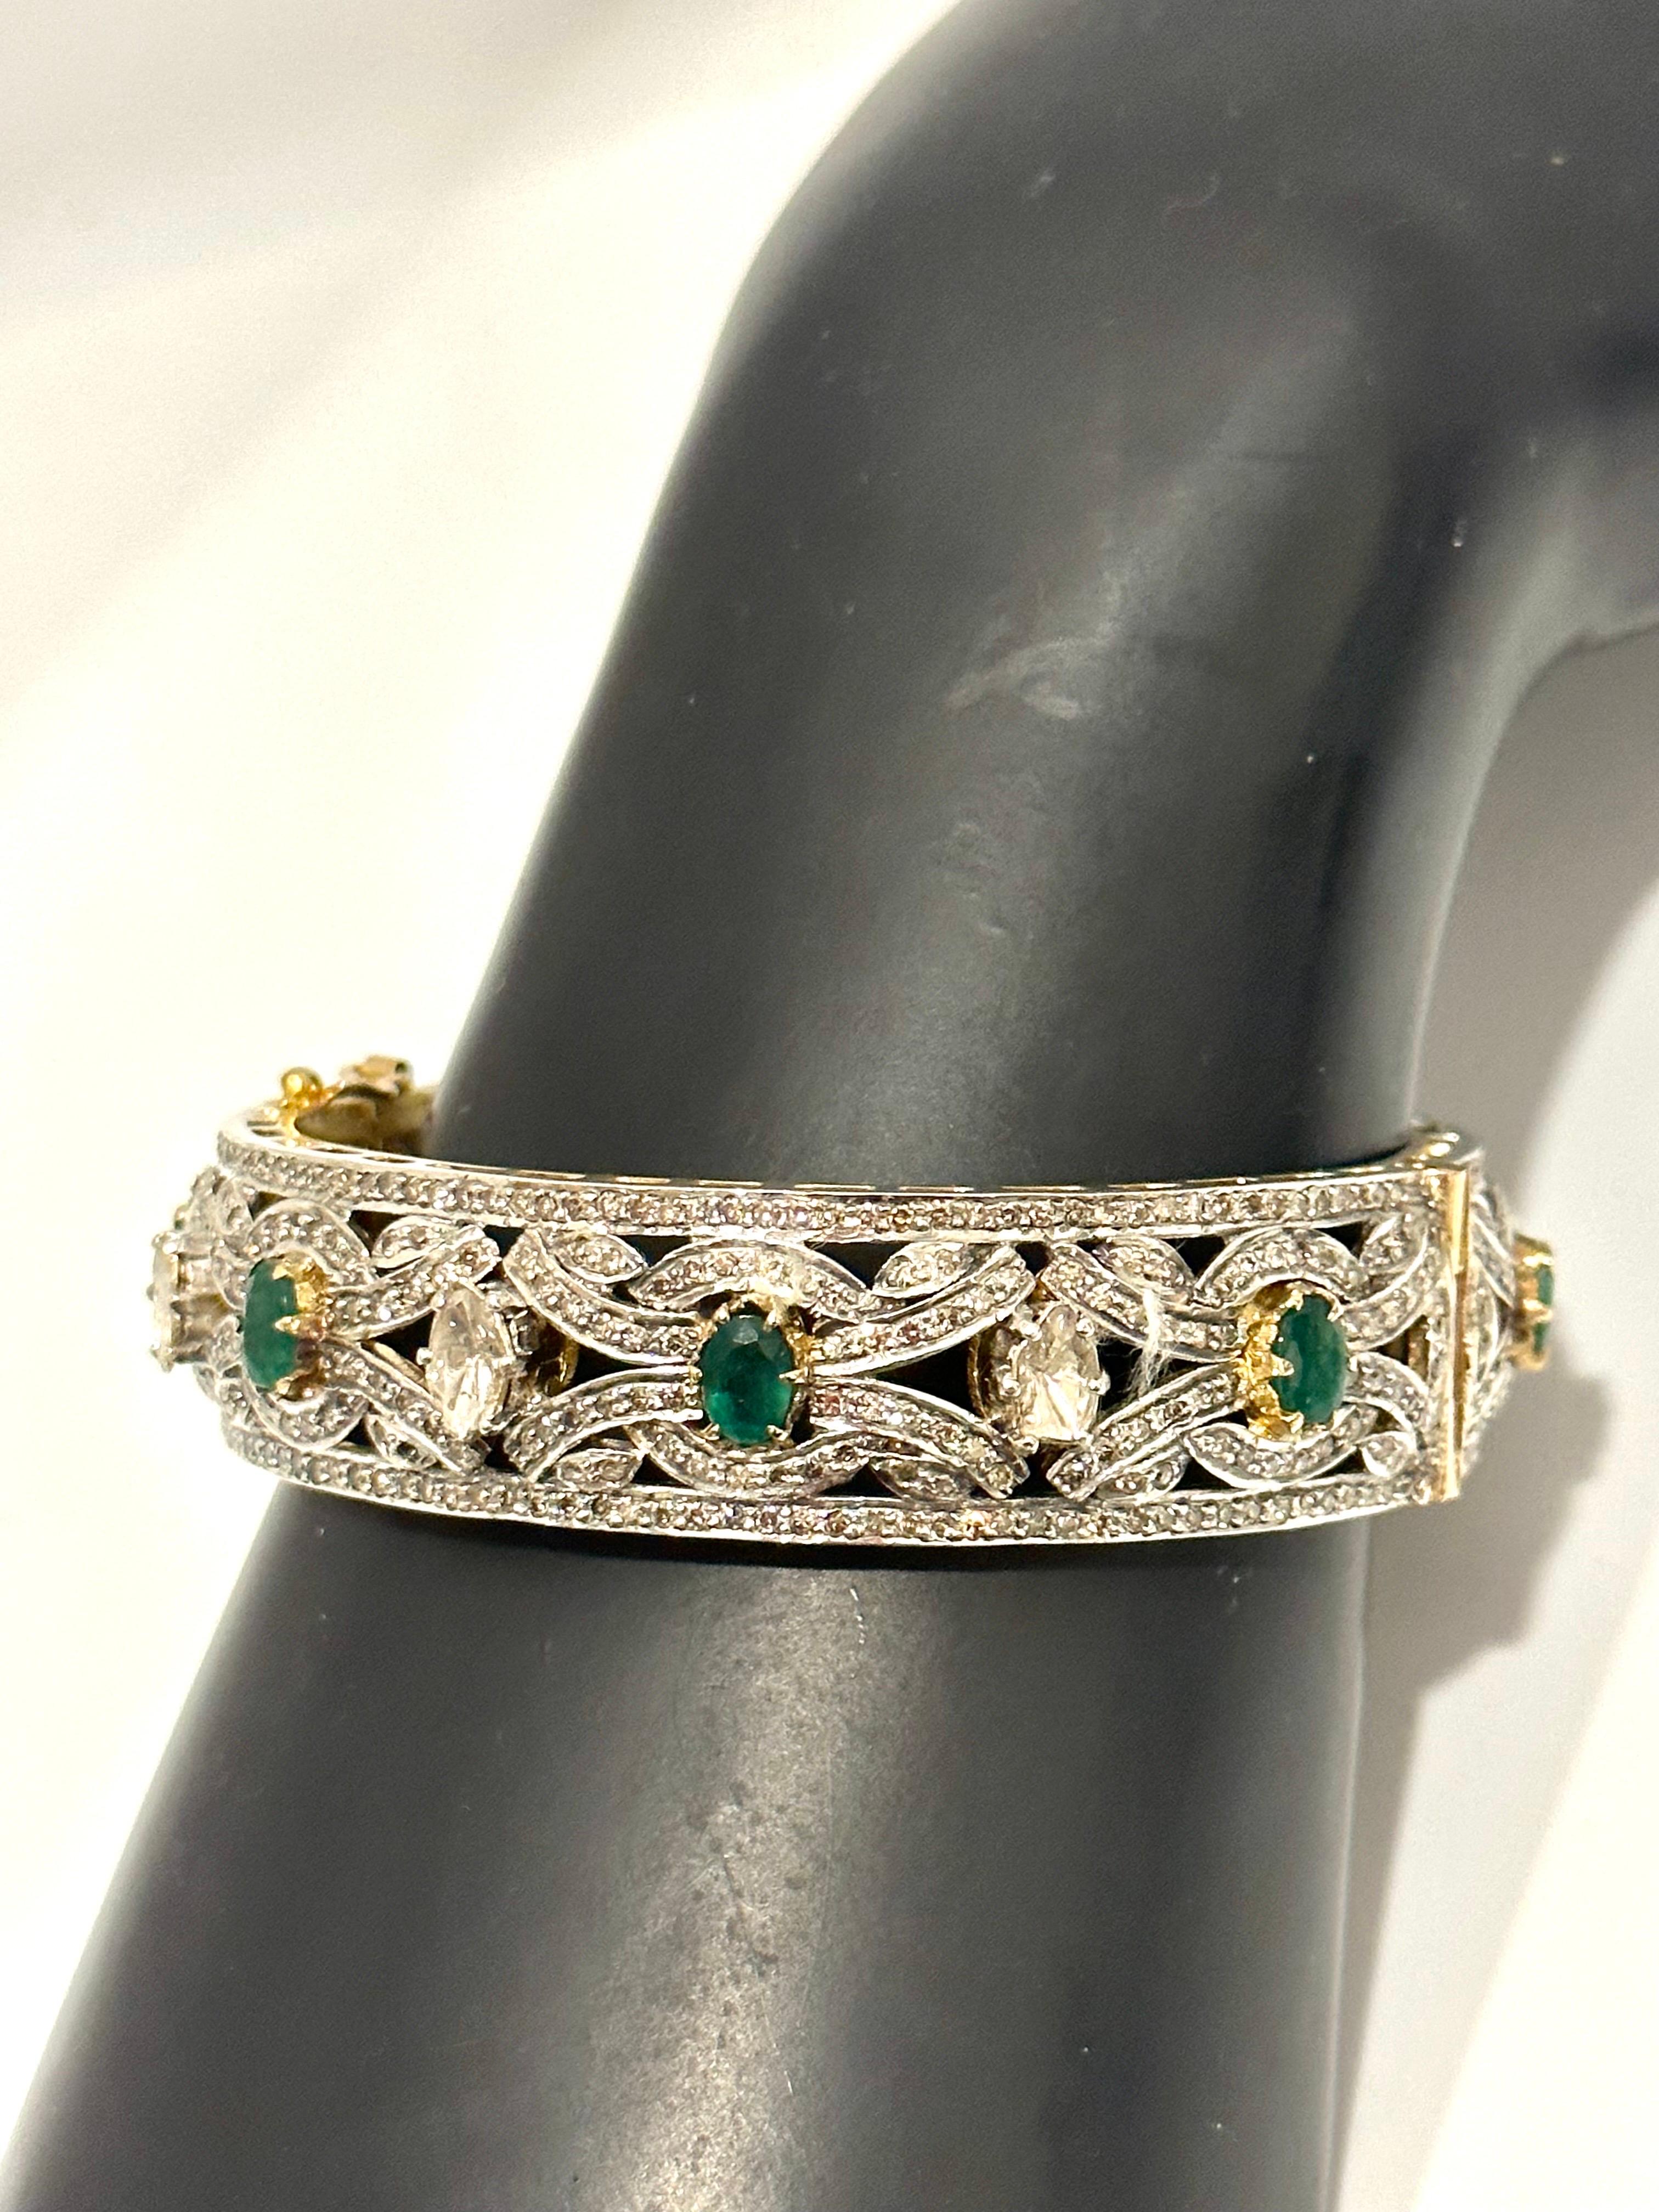 18 Karat Yellow gold & 925 Silver Polki Bangle, Solid Silver &  Gold  Diamond Bangle, Victorian Diamond Handmade Bracelets
It features a bangle style  crafted from an 18k Yellow gold and  Sterling Silver embedded with many  big  polki  diamonds and